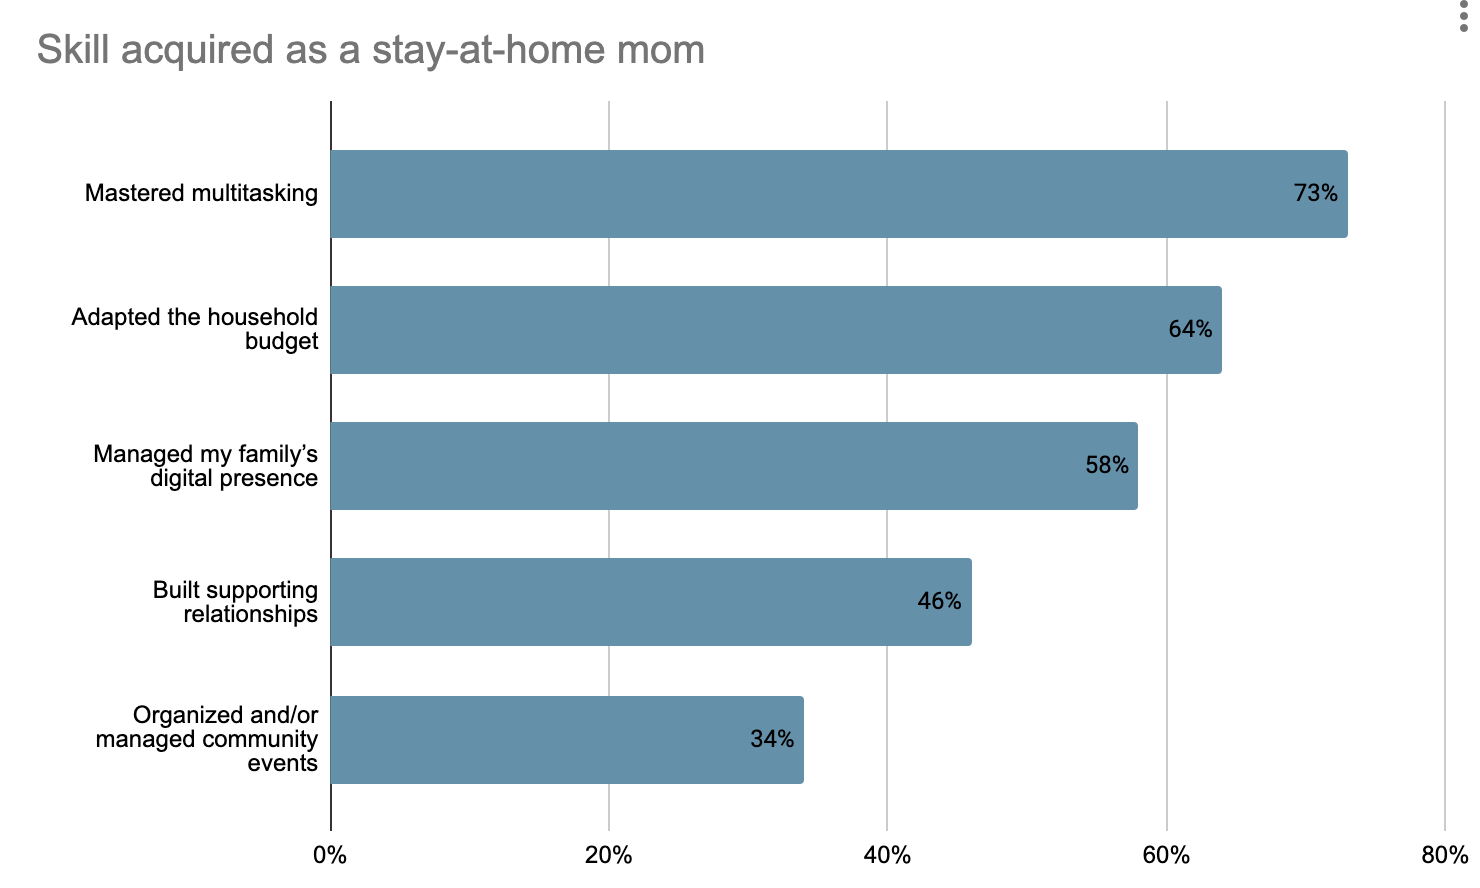 27 Must-Have Stay-at-Home Mom Essentials (from a survey of 115